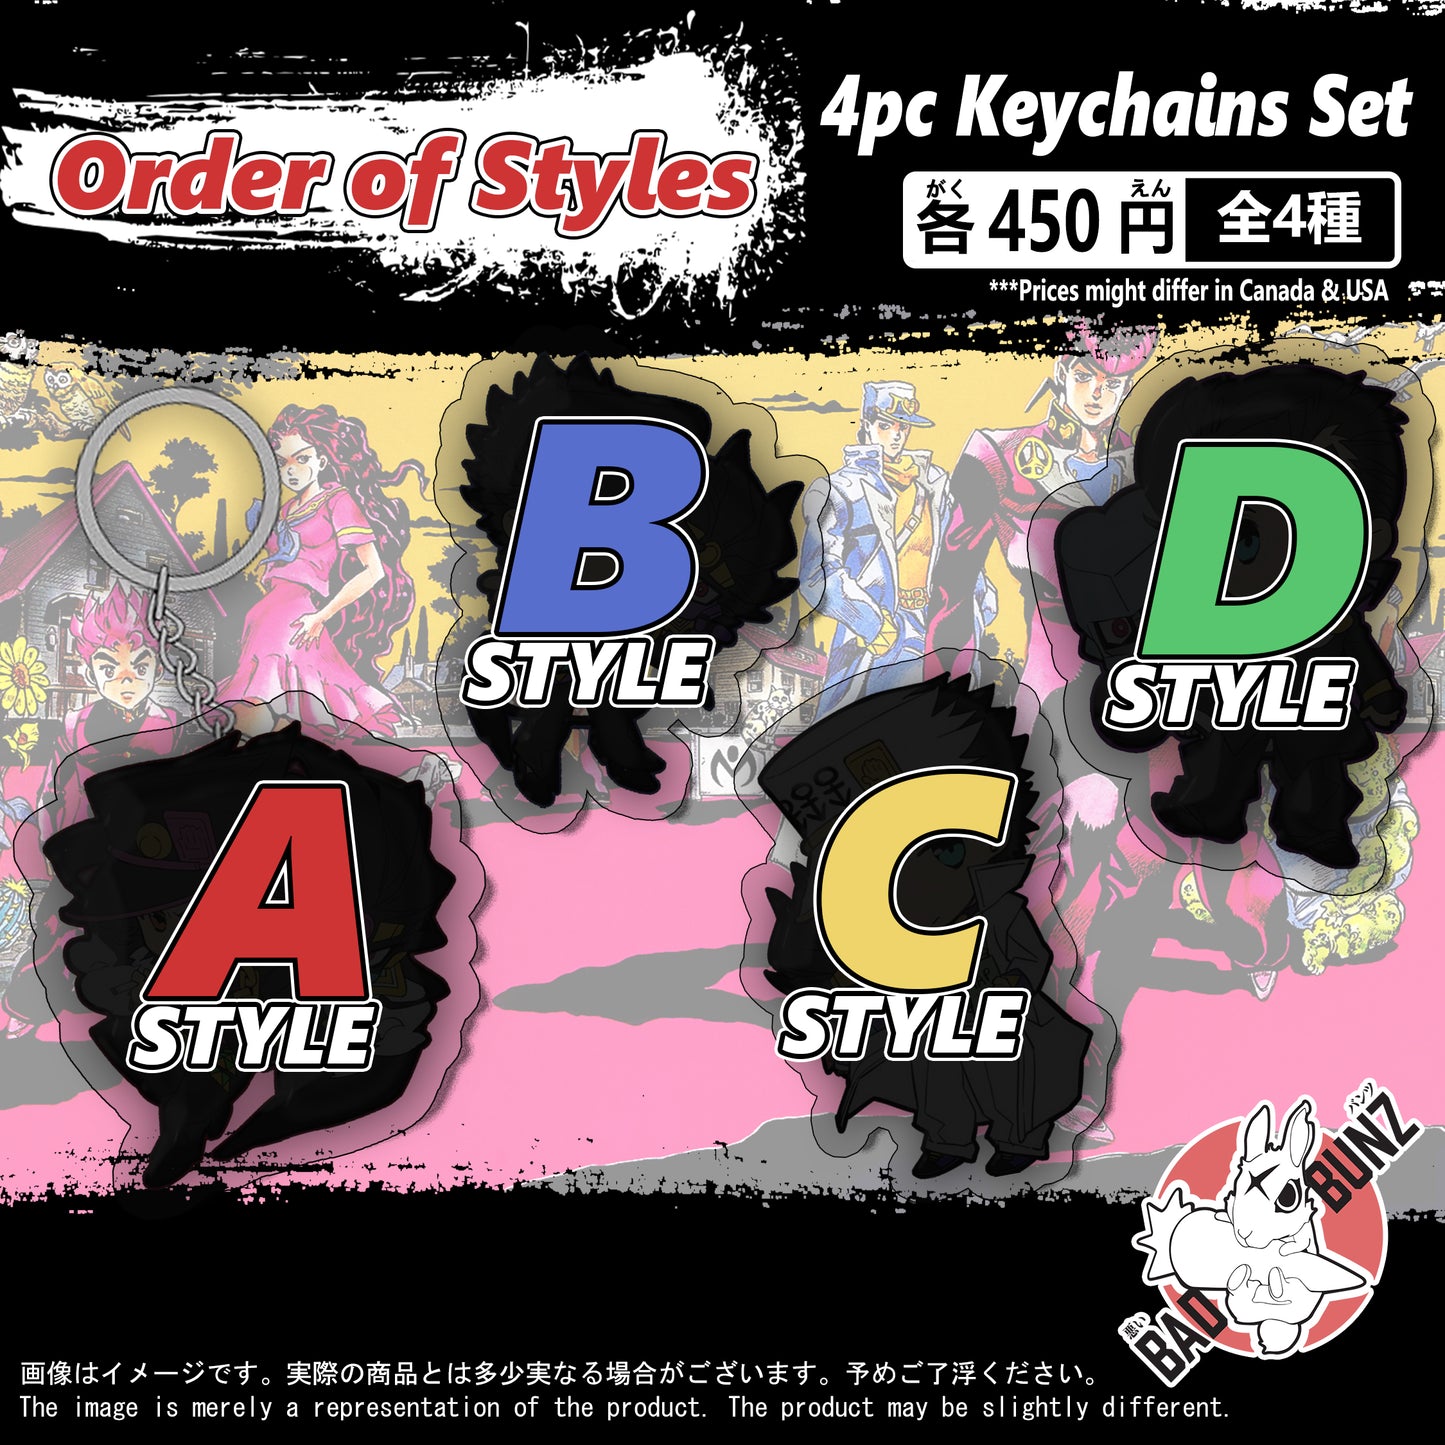 (MISC-02KC) Miscellaneous Anime Game Double-Sided Acrylic Keychain Set